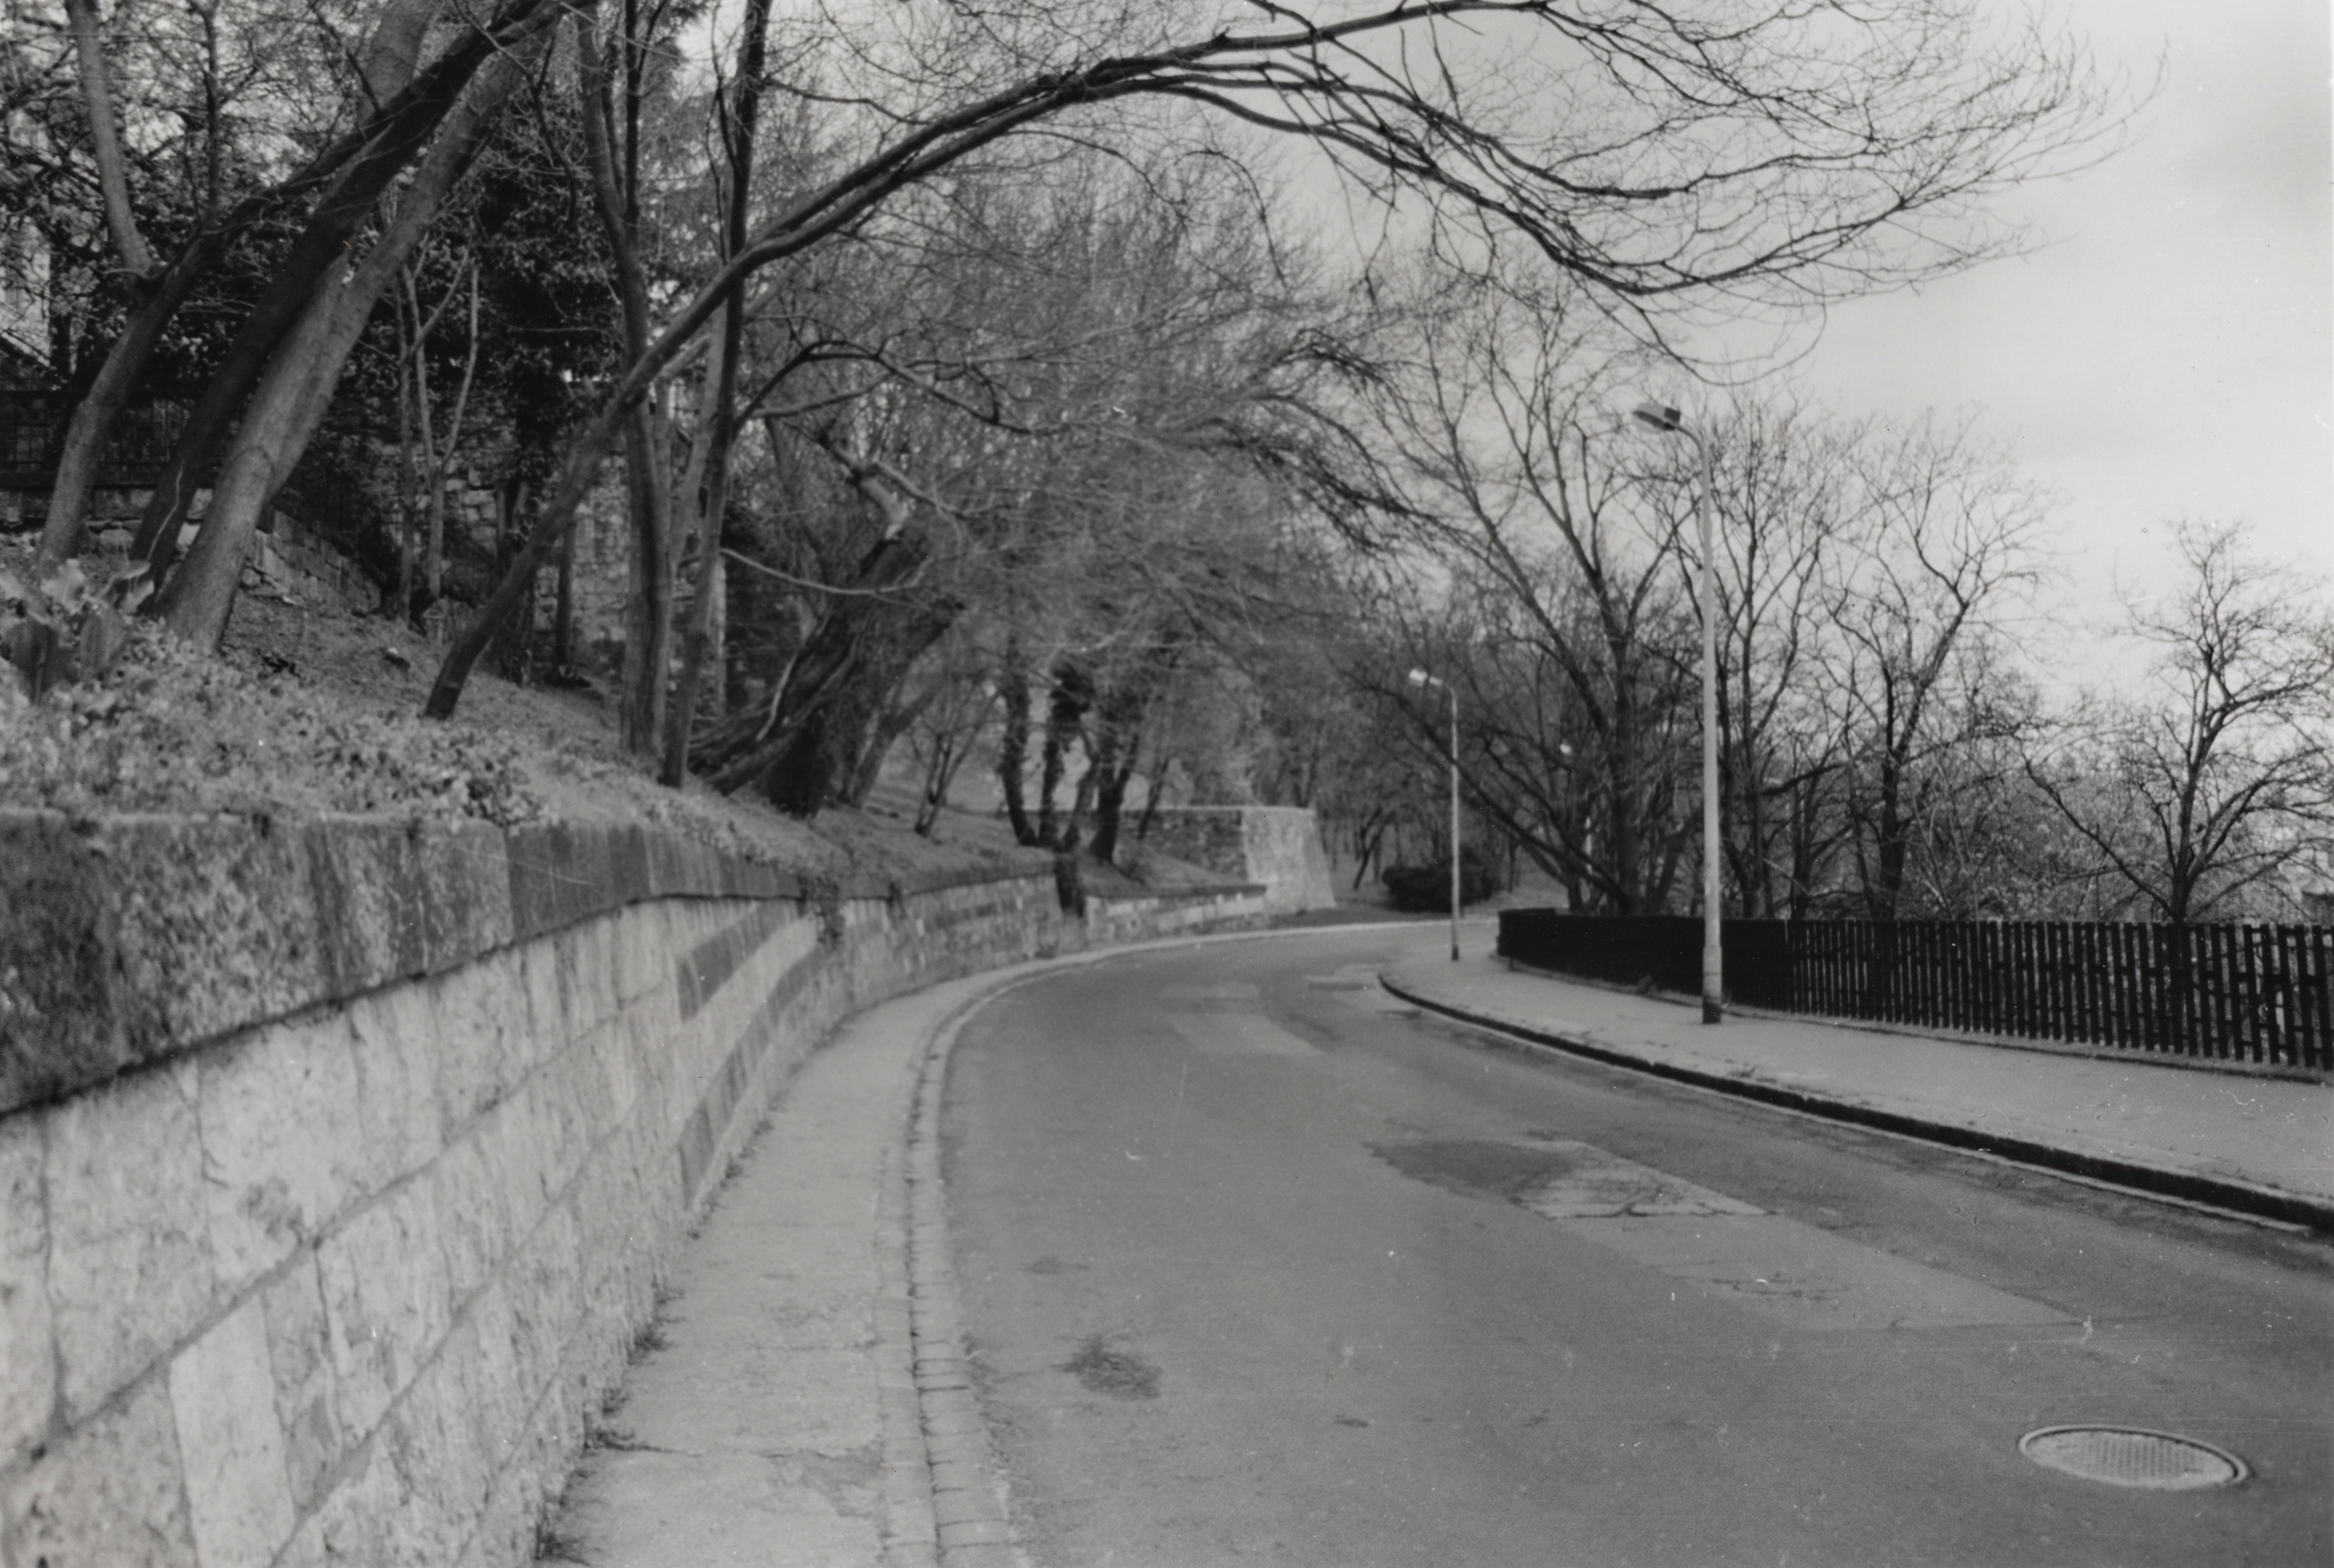 black and white 35mm print; on a street in budapest (buda) built into the hillside; the photo is shot looking down a hill and the road curves to the right and behind the iron fence on the right; there are sidewalks on bath sides and street lamps on the right; on hte left above the road is a stone retaining wall securing a vegetated slope above with many leafless trees that curve out and over the road; the overcast sky is visible in the top right corner above trees growing below